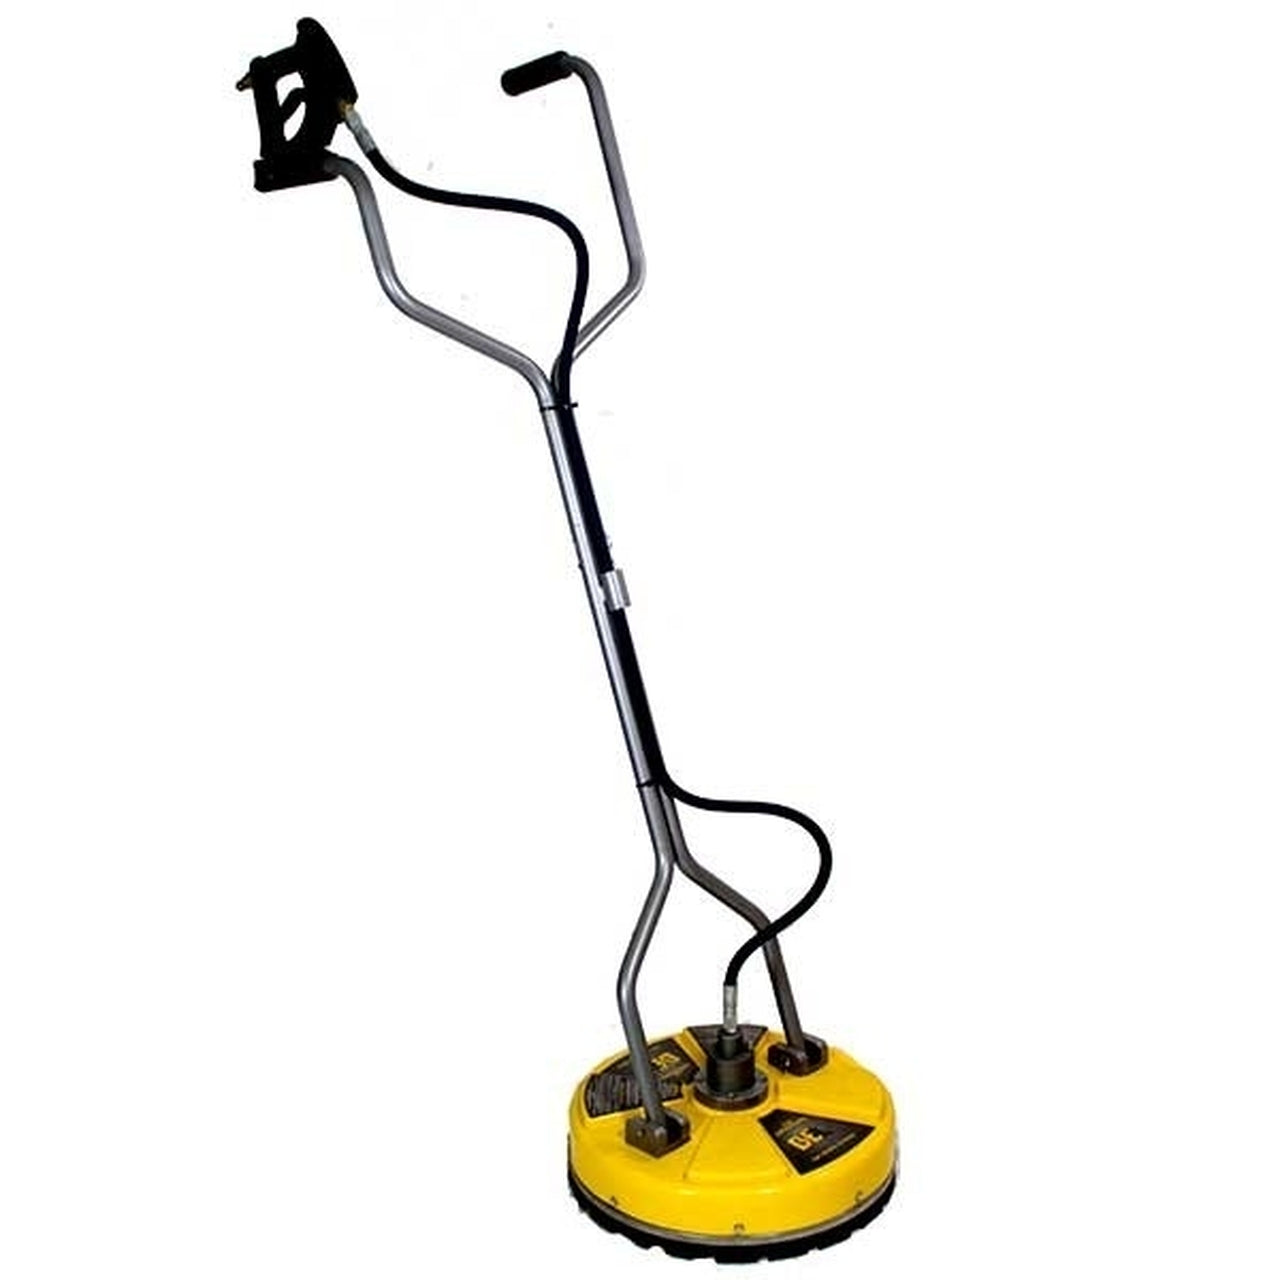 BE 85.403.003 Pressure Whirlaway 16" Rotary Surface Cleaner by Hyundai